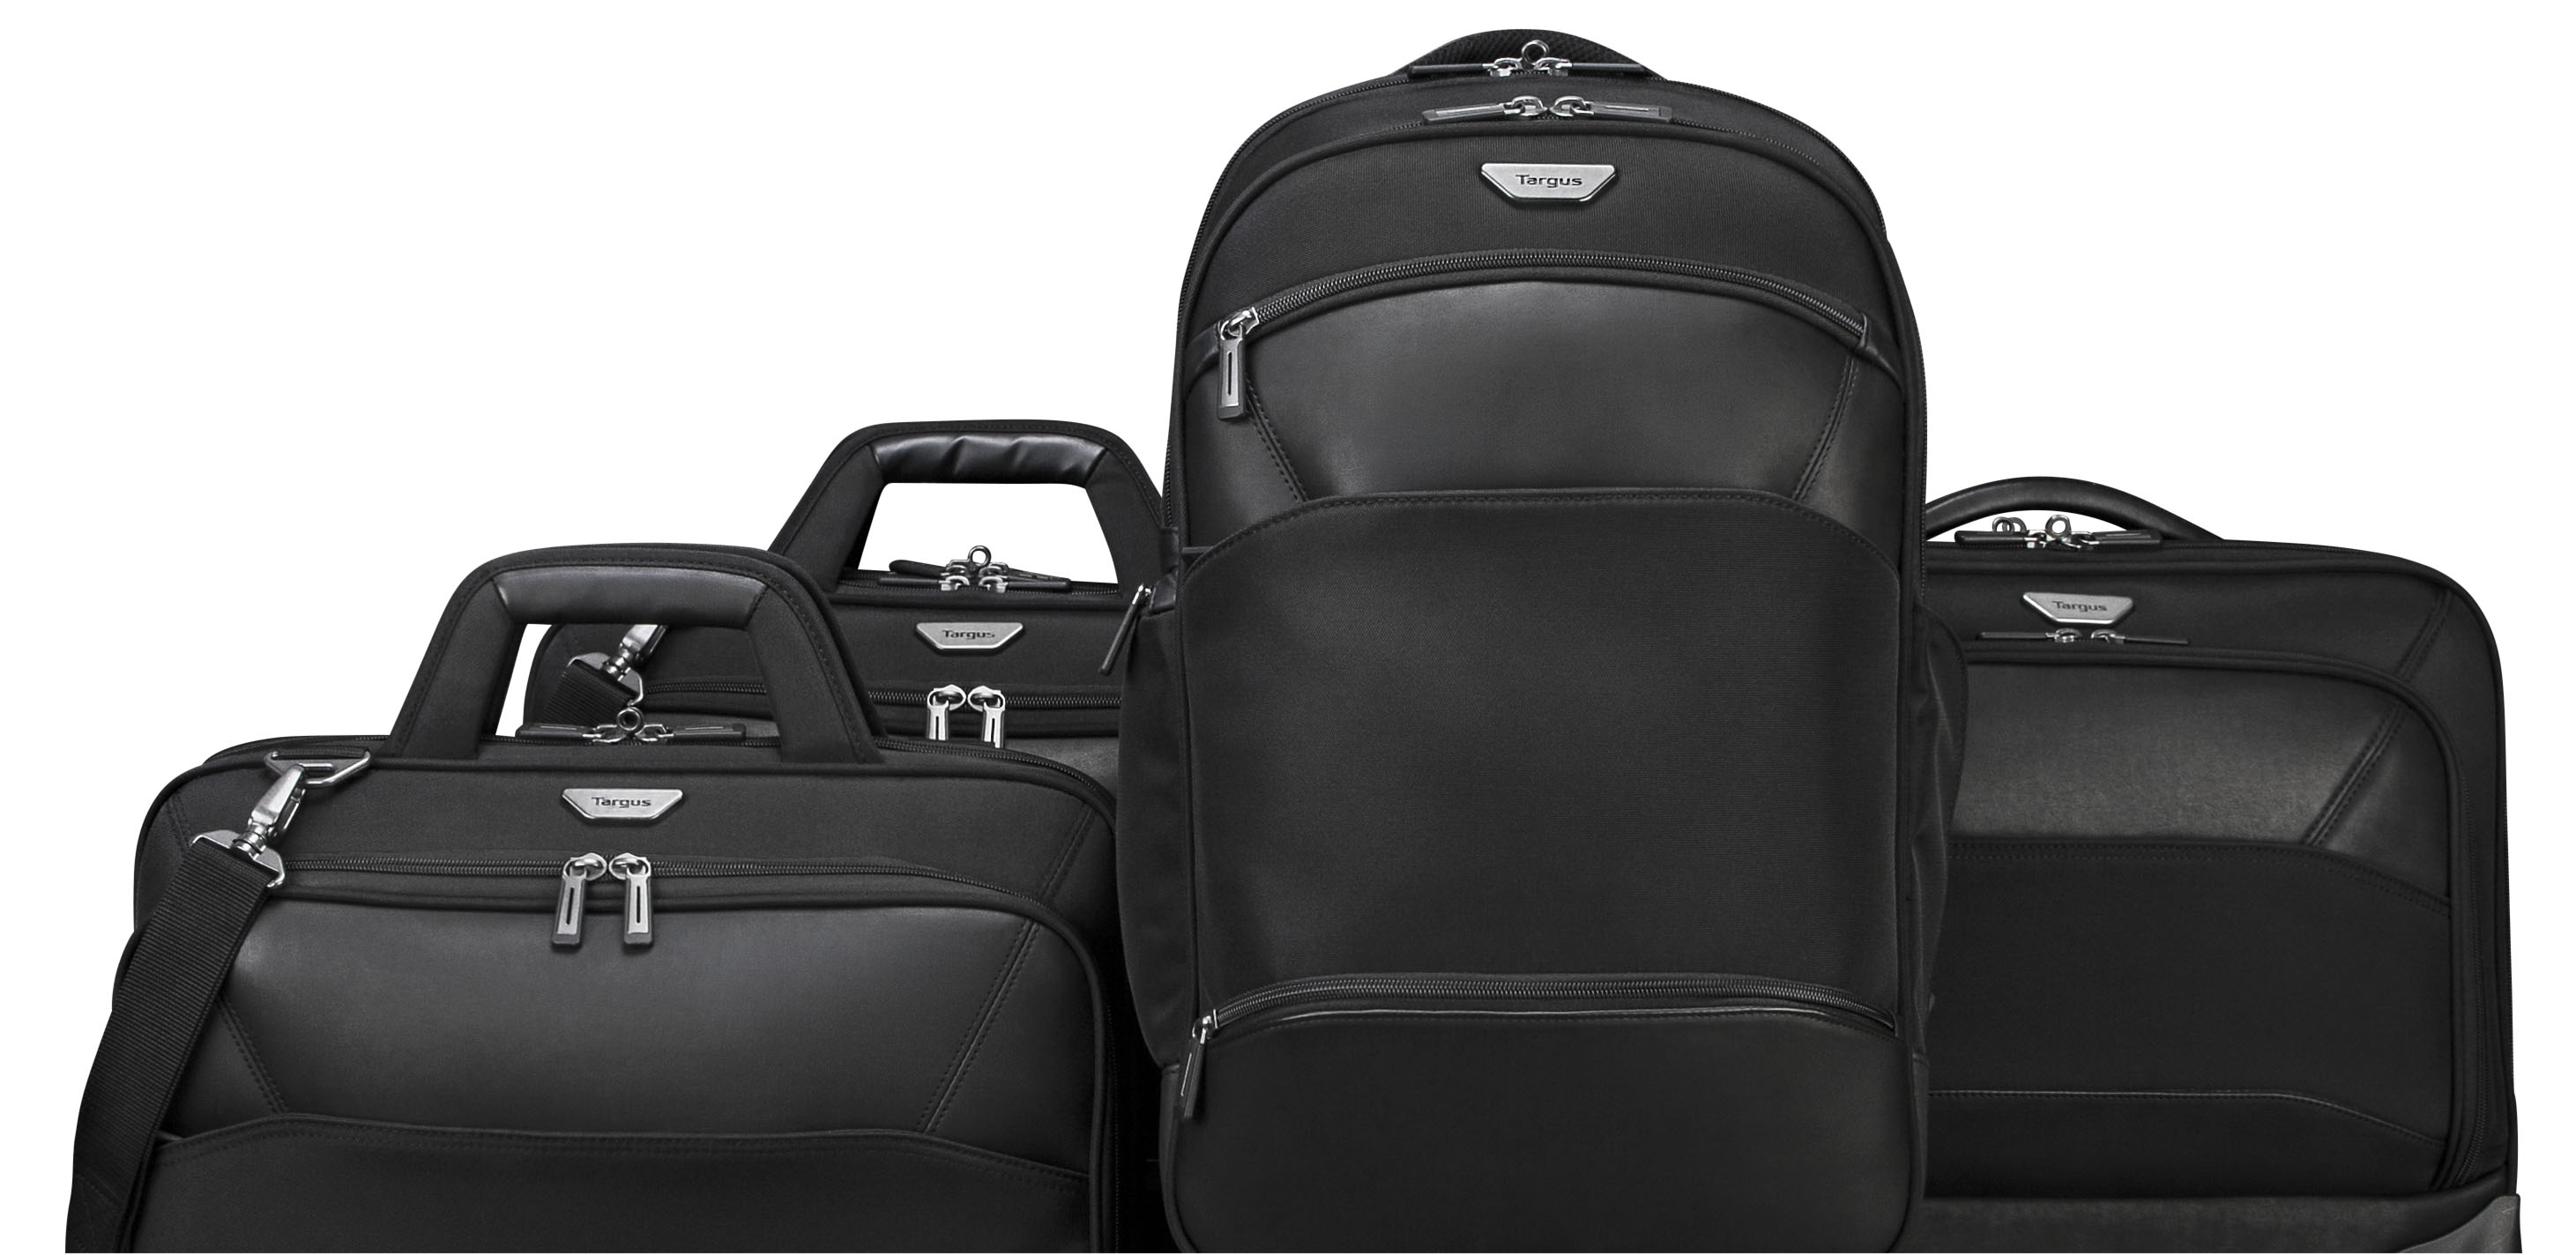 Introducing the Targus Mobile ViP Collection – Premium Laptop Cases